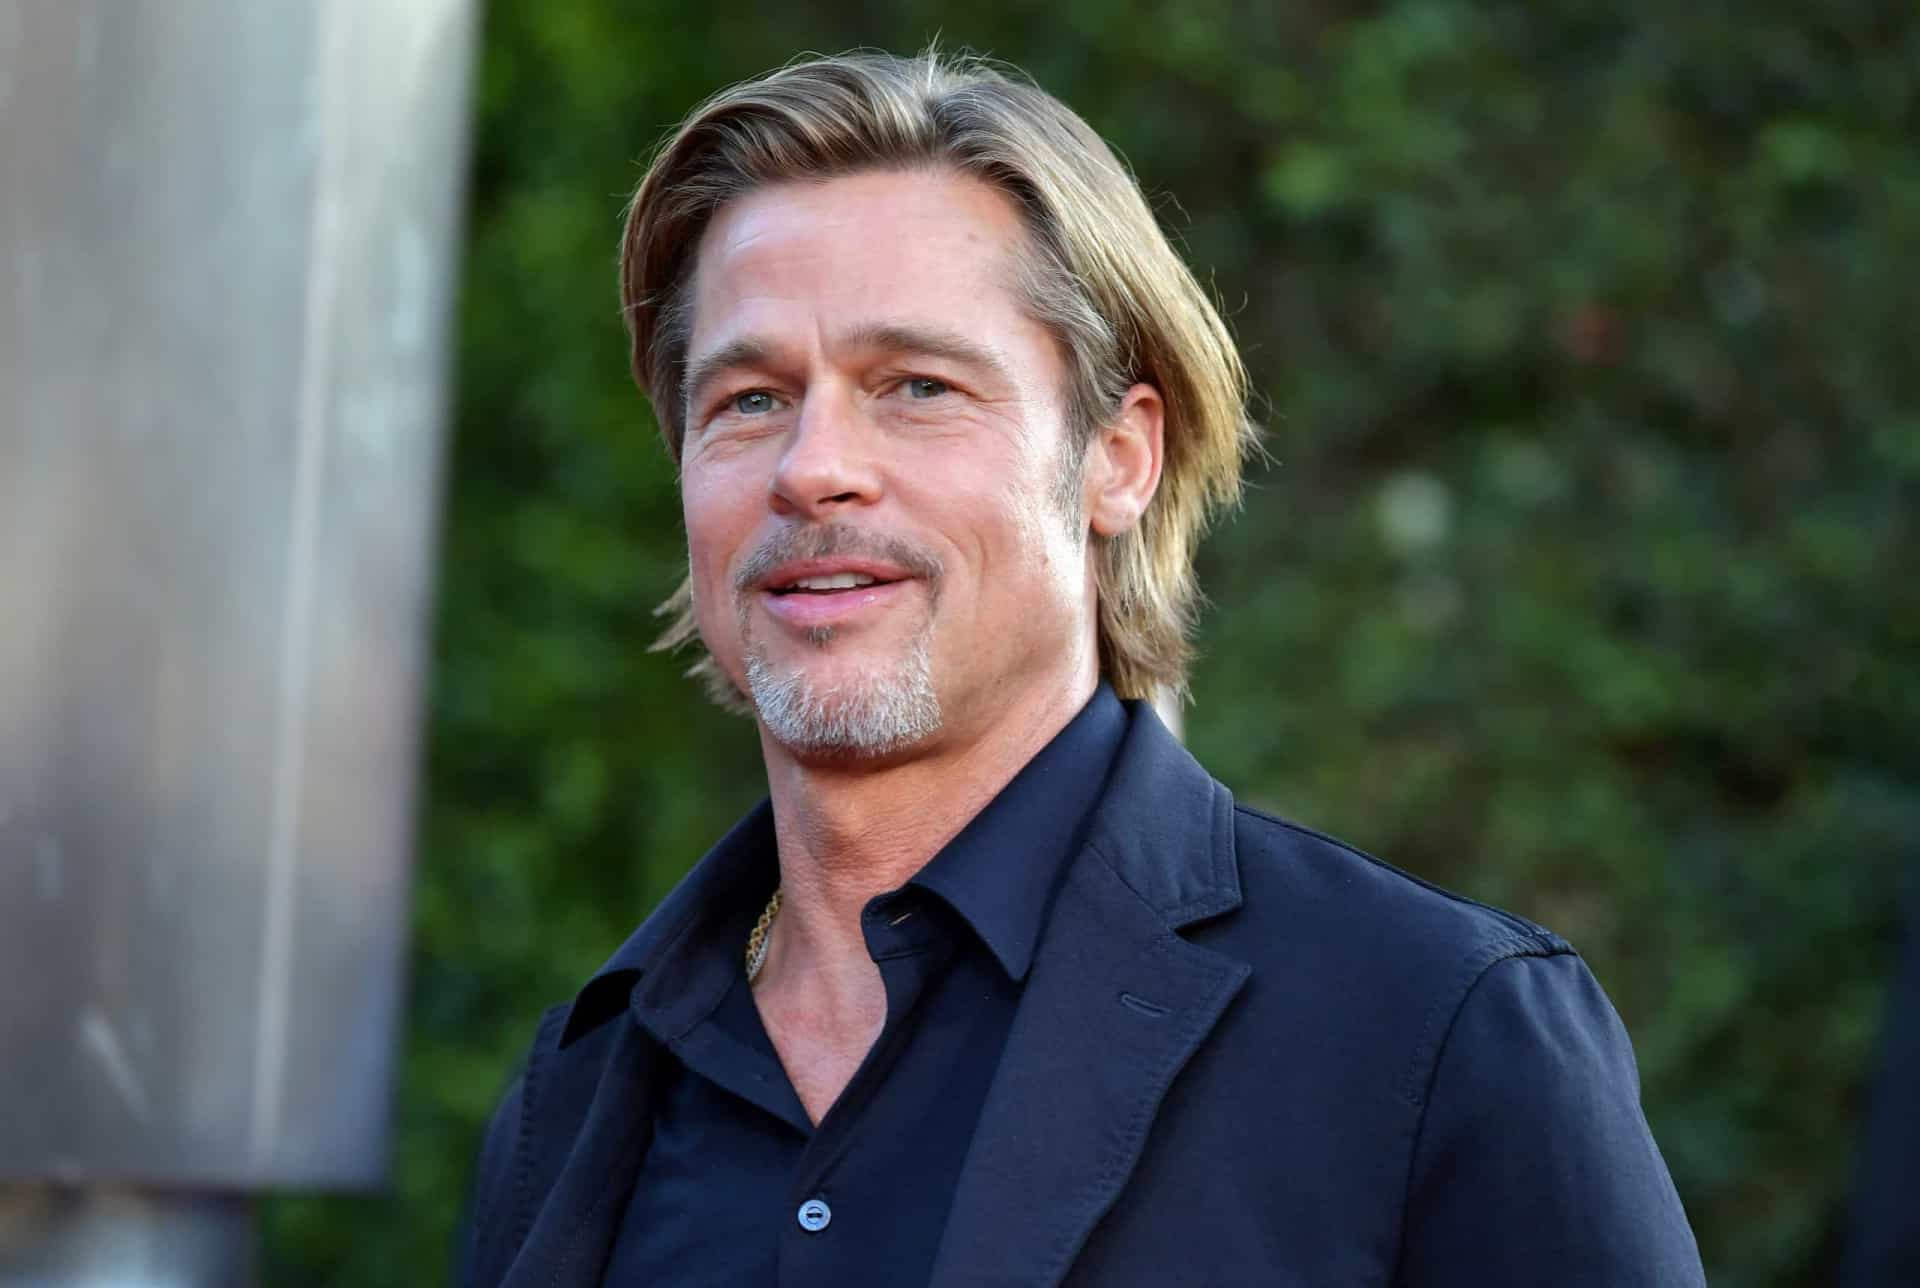 <p>Brad Pitt dabbled in Scientology for three years after being introduced by then-girlfriend Juliette Lewis in the '90s. New information in The Sun surfaced from an ex-follower of the church, detailing Pitt’s turbulent time there, which apparently involved being “twinned” with a 15-year-old girl for up to five hours a day in a hot sauna, and being screamed at as part of therapy.</p><p>You may also like:<a href="https://www.starsinsider.com/n/236534?utm_source=msn.com&utm_medium=display&utm_campaign=referral_description&utm_content=345323v6en-us"> Australia’s secret swimming spots</a></p>